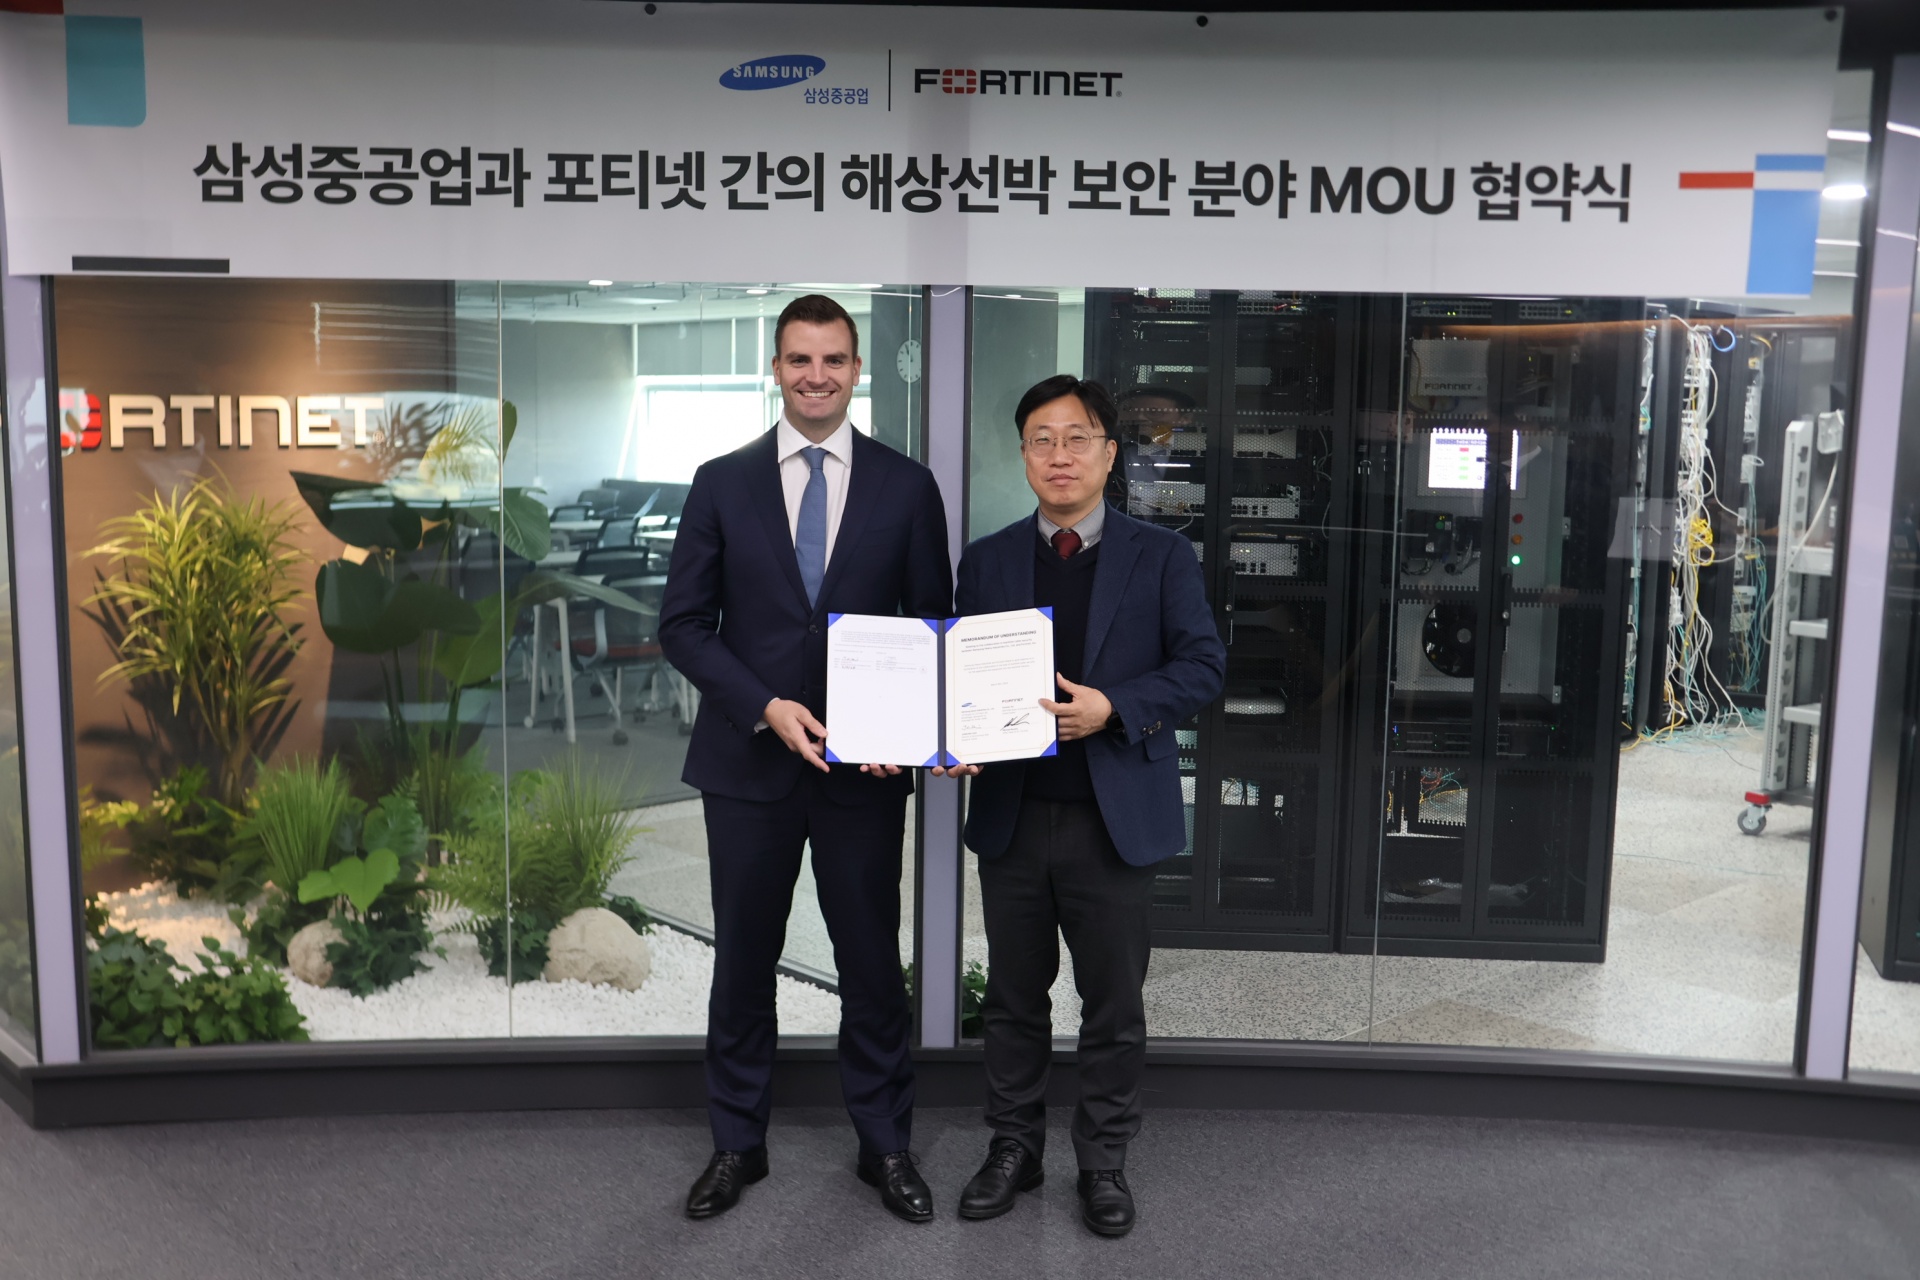 Fortinet and Samsung Heavy Industries sign MoU on maritime cybersecurity